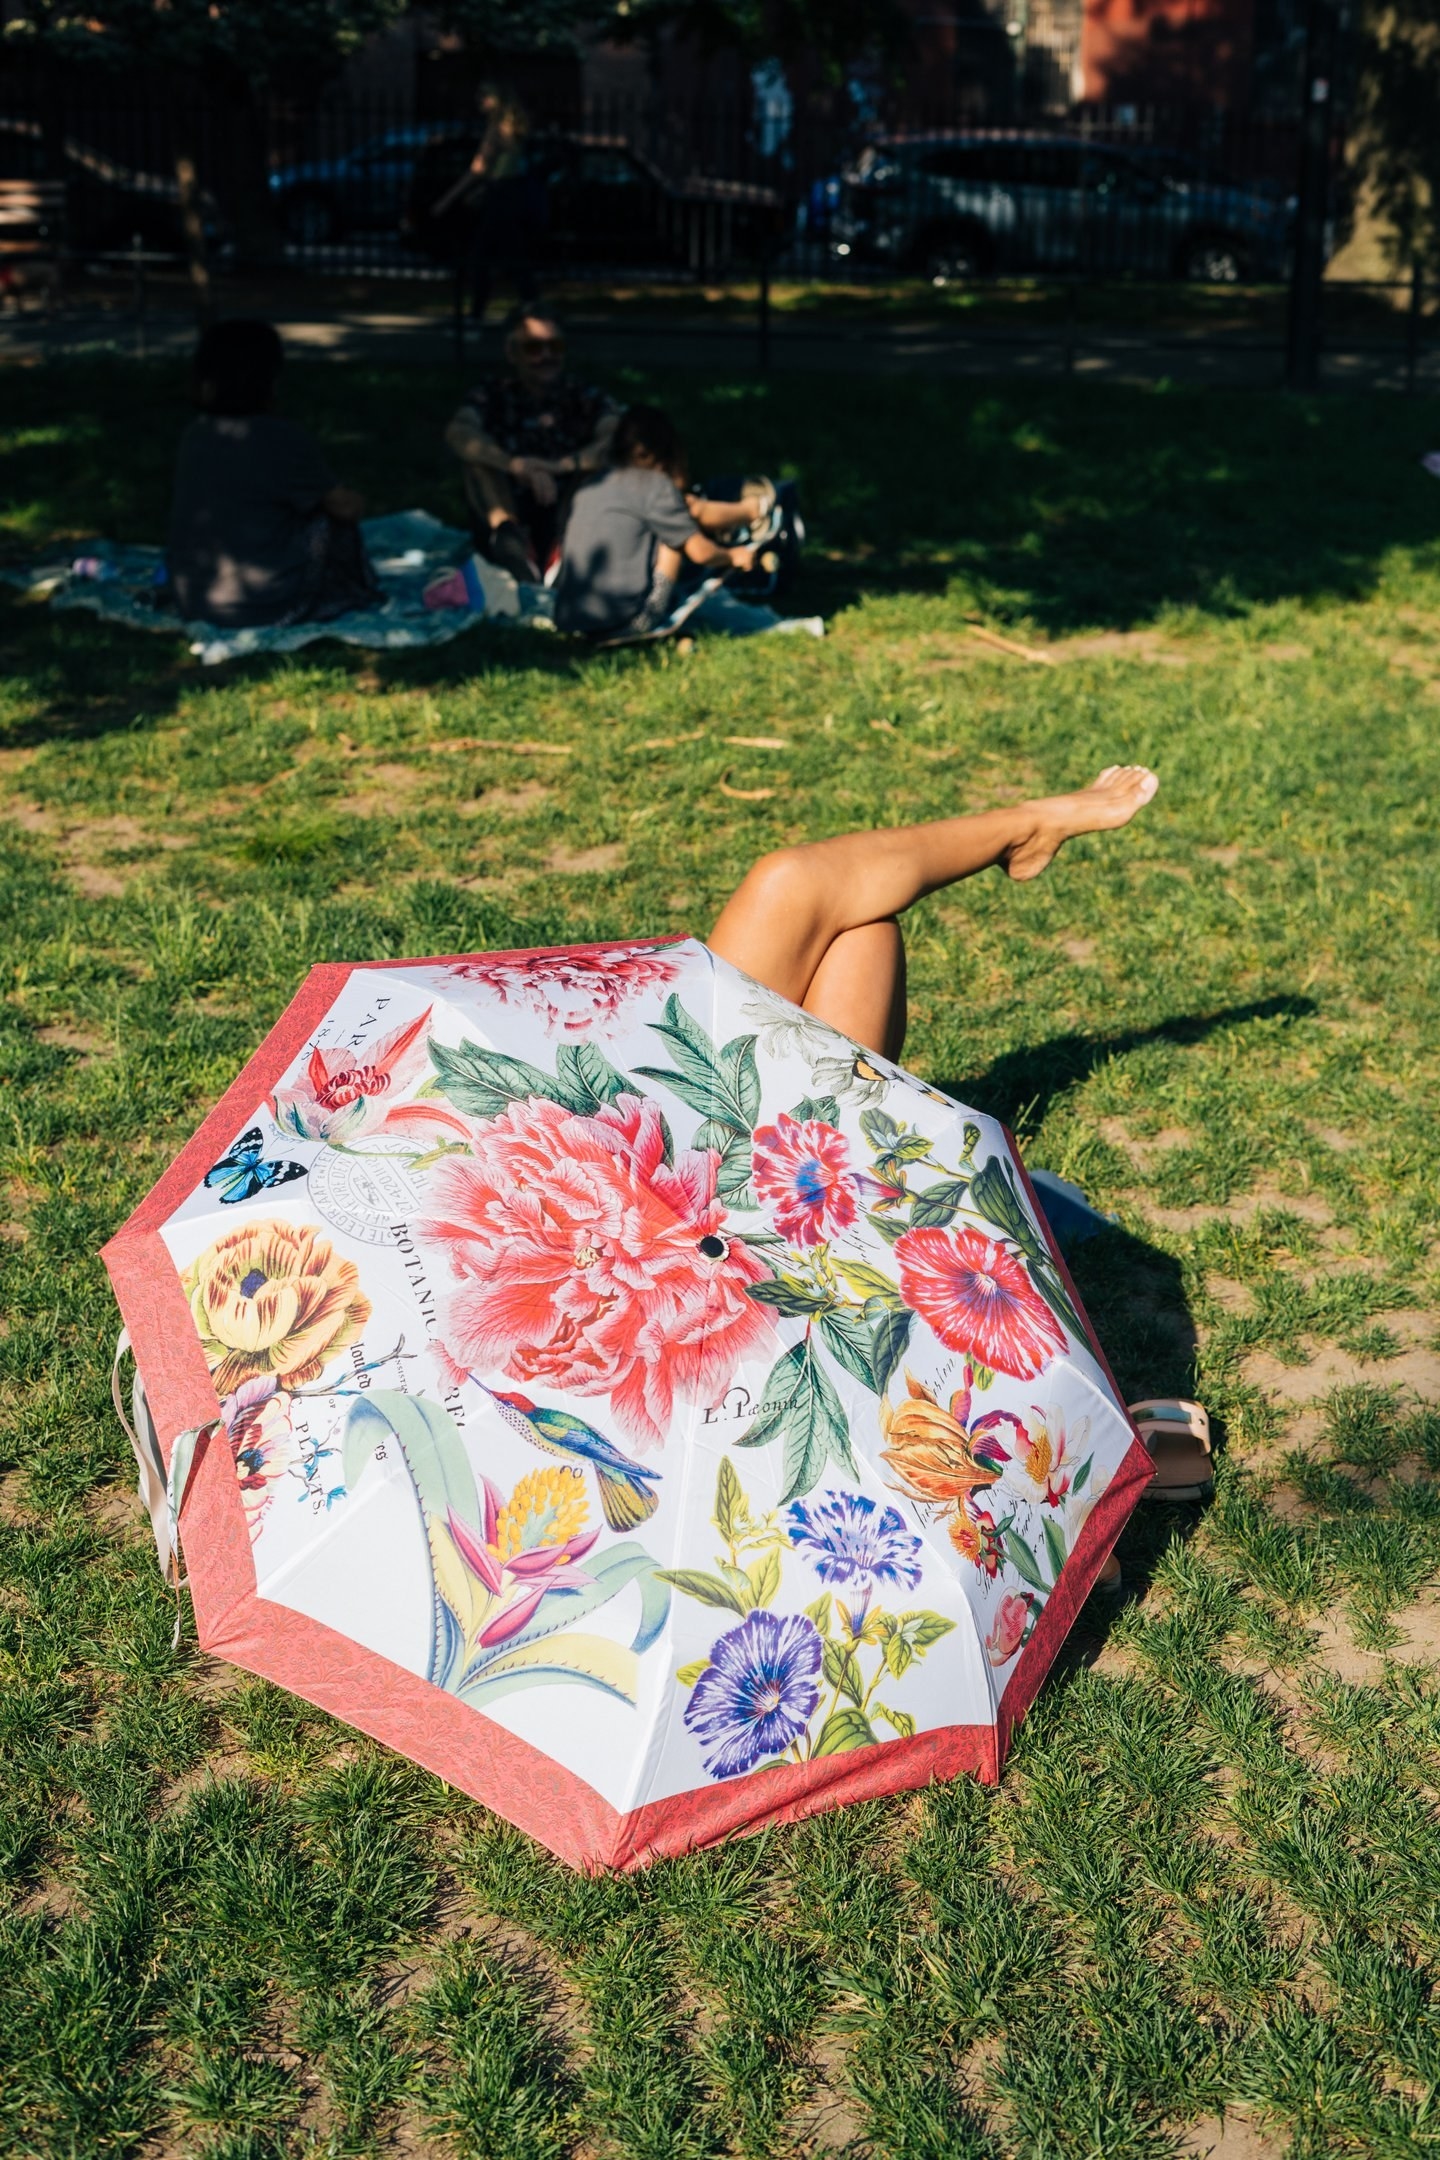 Jutharat Pinyodoonyachet, Umbrella (showing a woman&#x27;s bare crossed legs emerging from underneath a flower-decorated umbrella